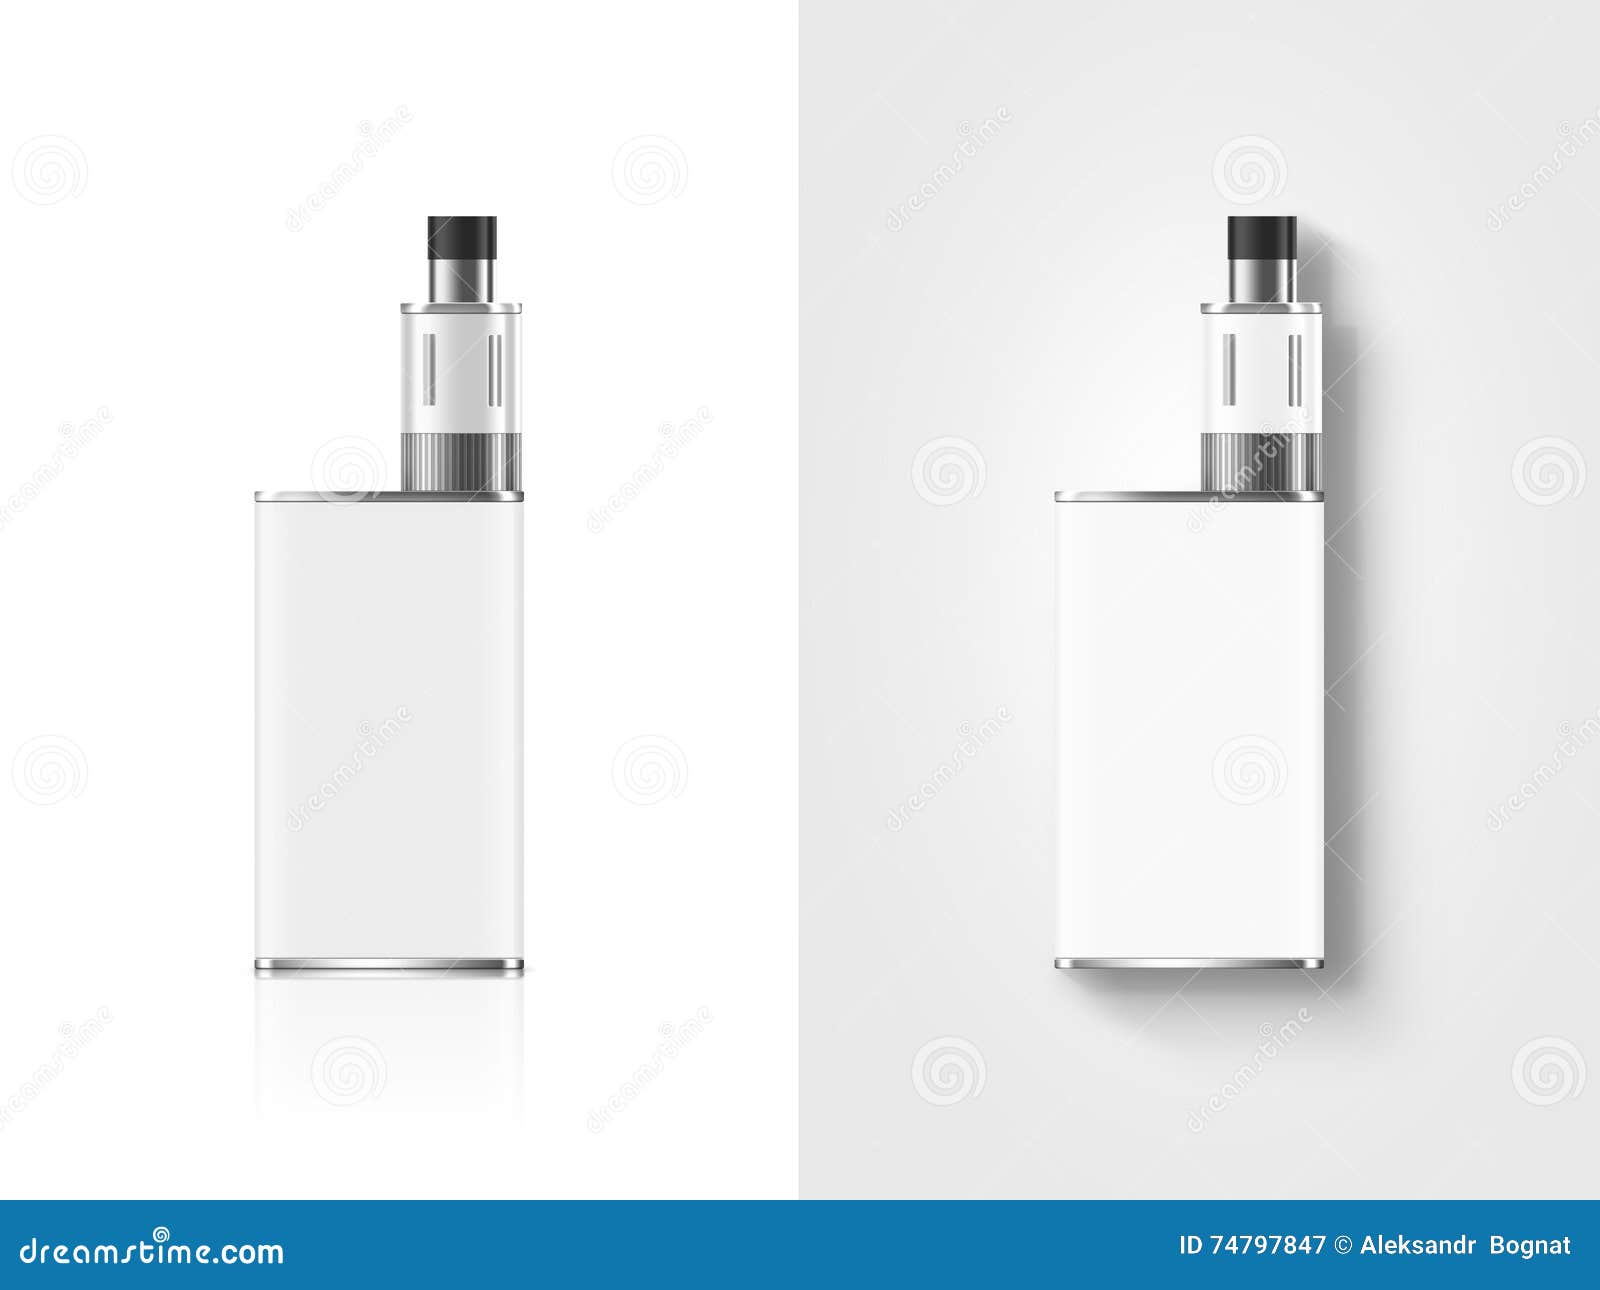 Download Blank White Vape Mod Box Mockup Isolated, Clipping Path ...